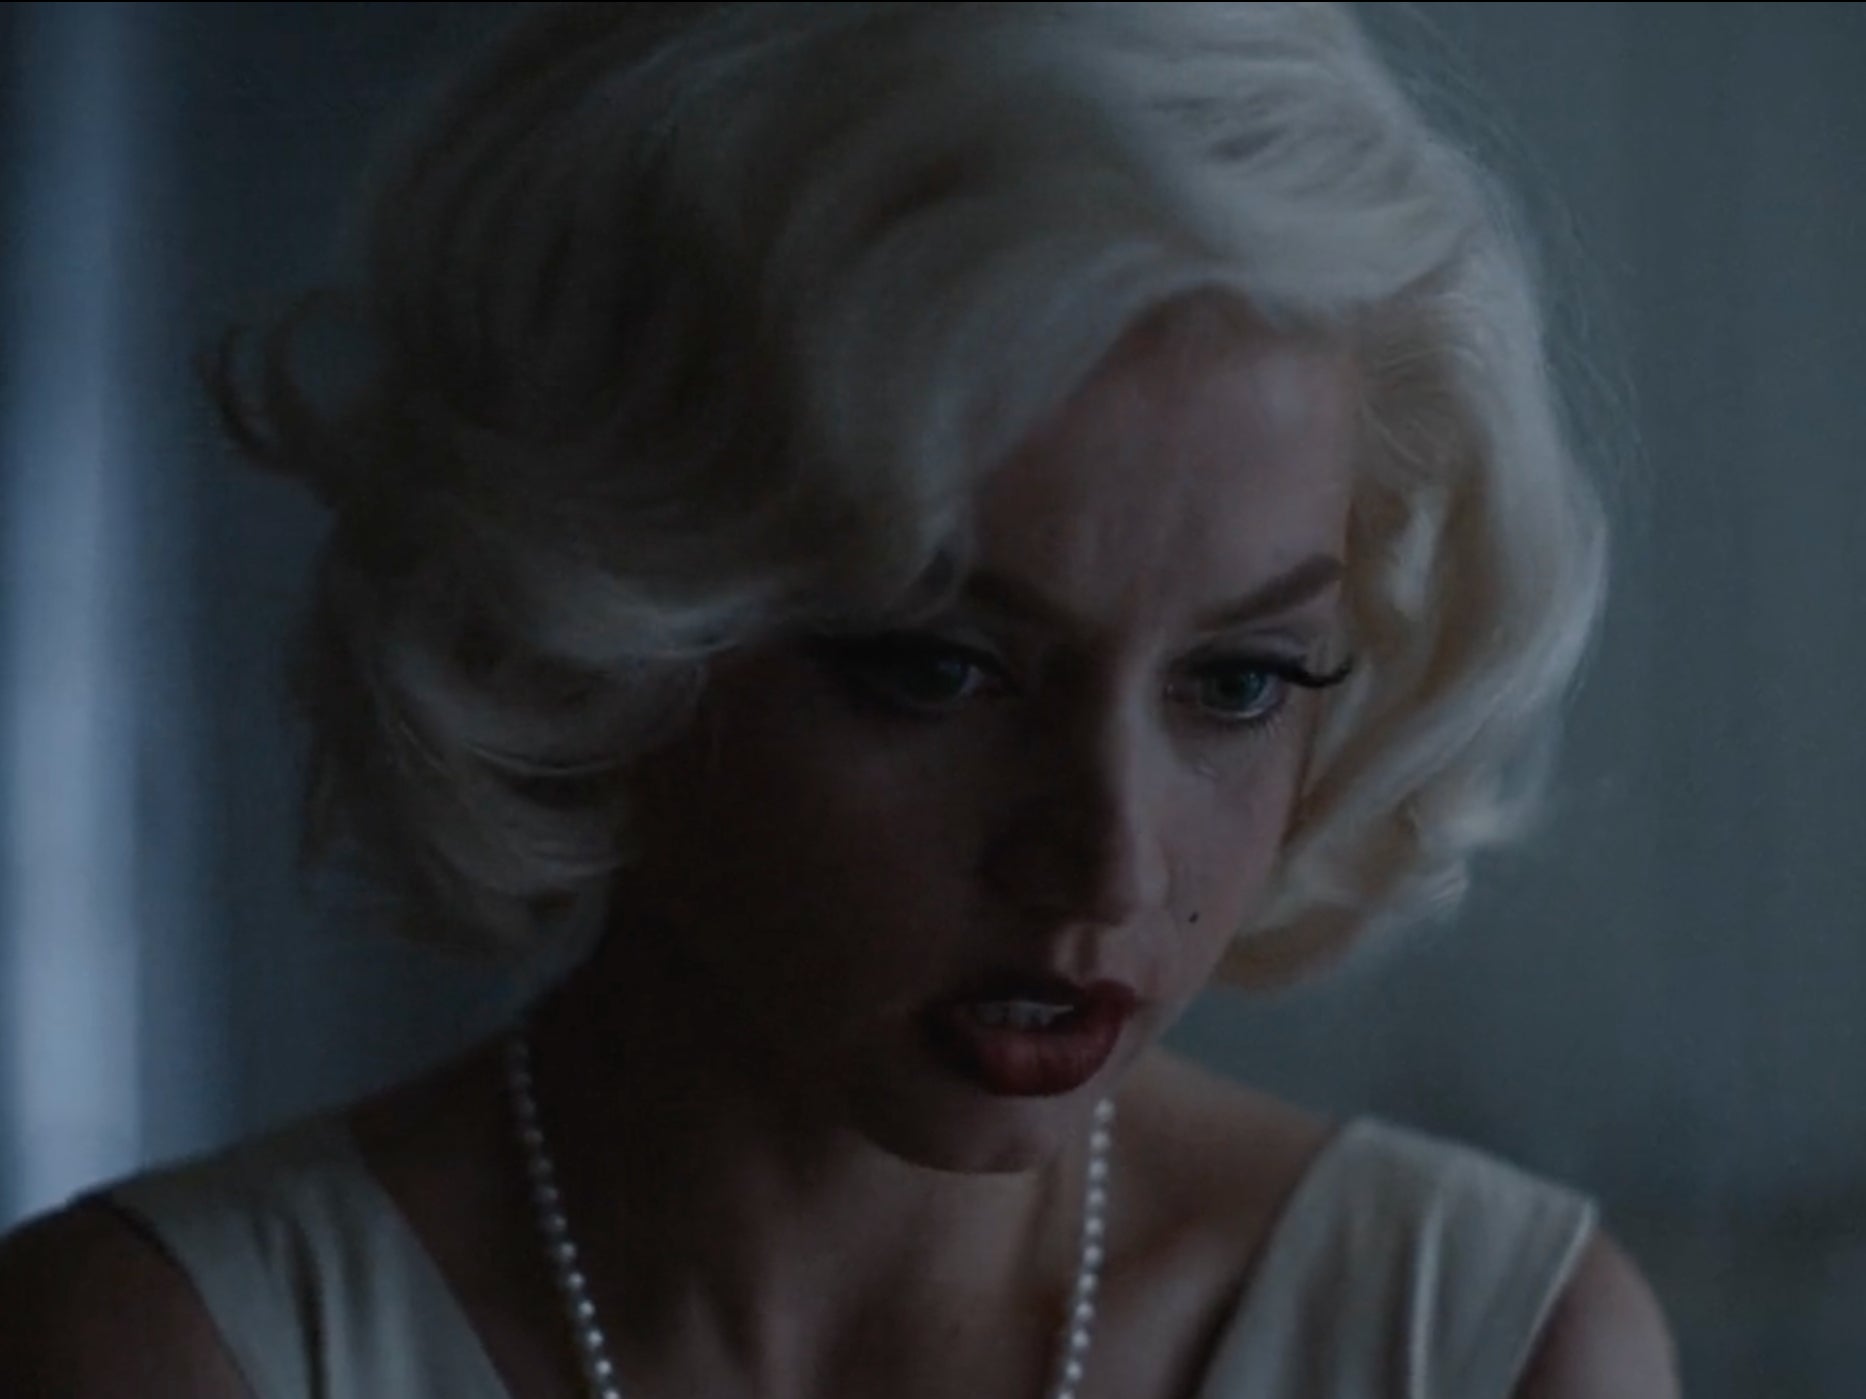 Rape Blonde - Blonde: Marilyn Monroe fans hit out at 'disgusting' and 'degrading' JFK  scene in Netflix movie | The Independent